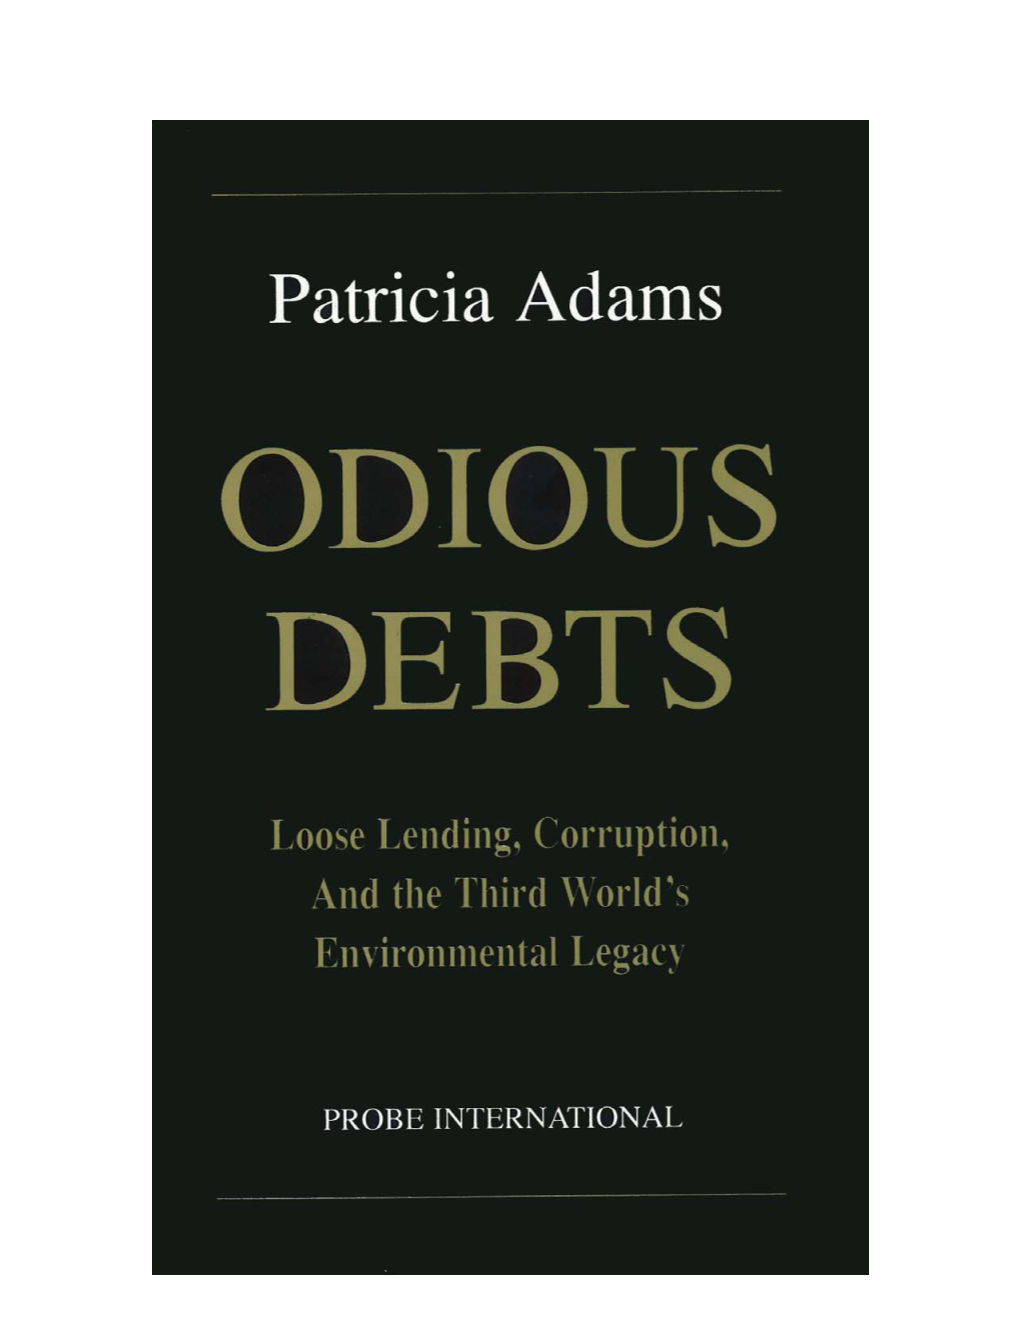 Odious Debts: Loose Lending, Corruption, and the Third World's Environmental Legacy